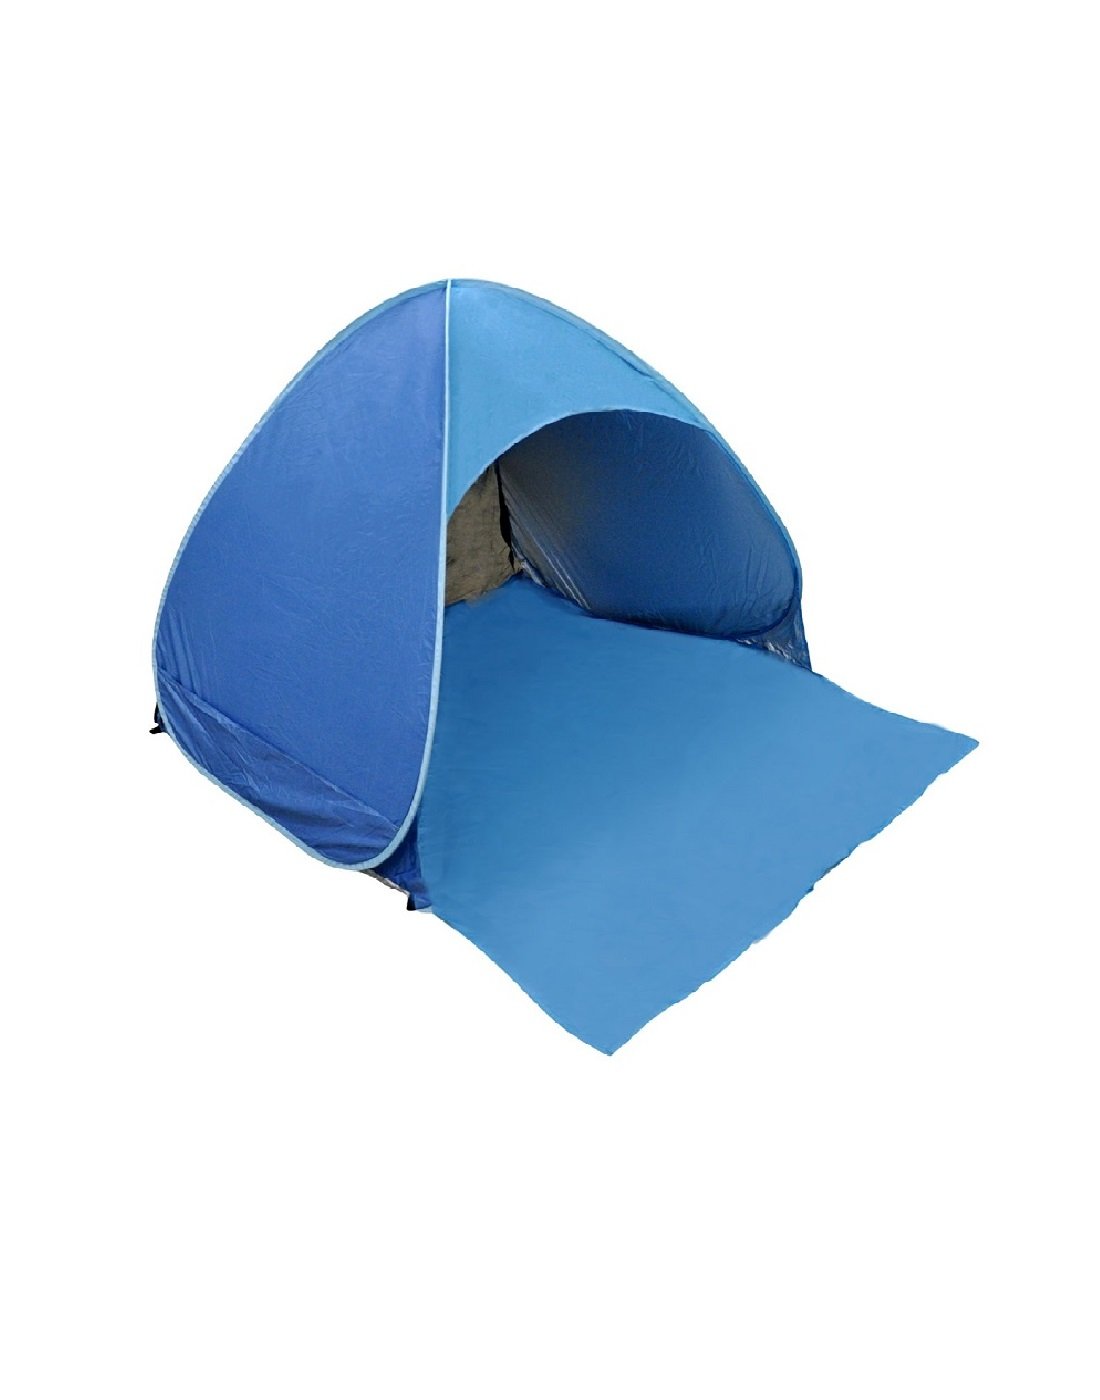 Image showing front three quarter view of sun tent in medium blue colour.